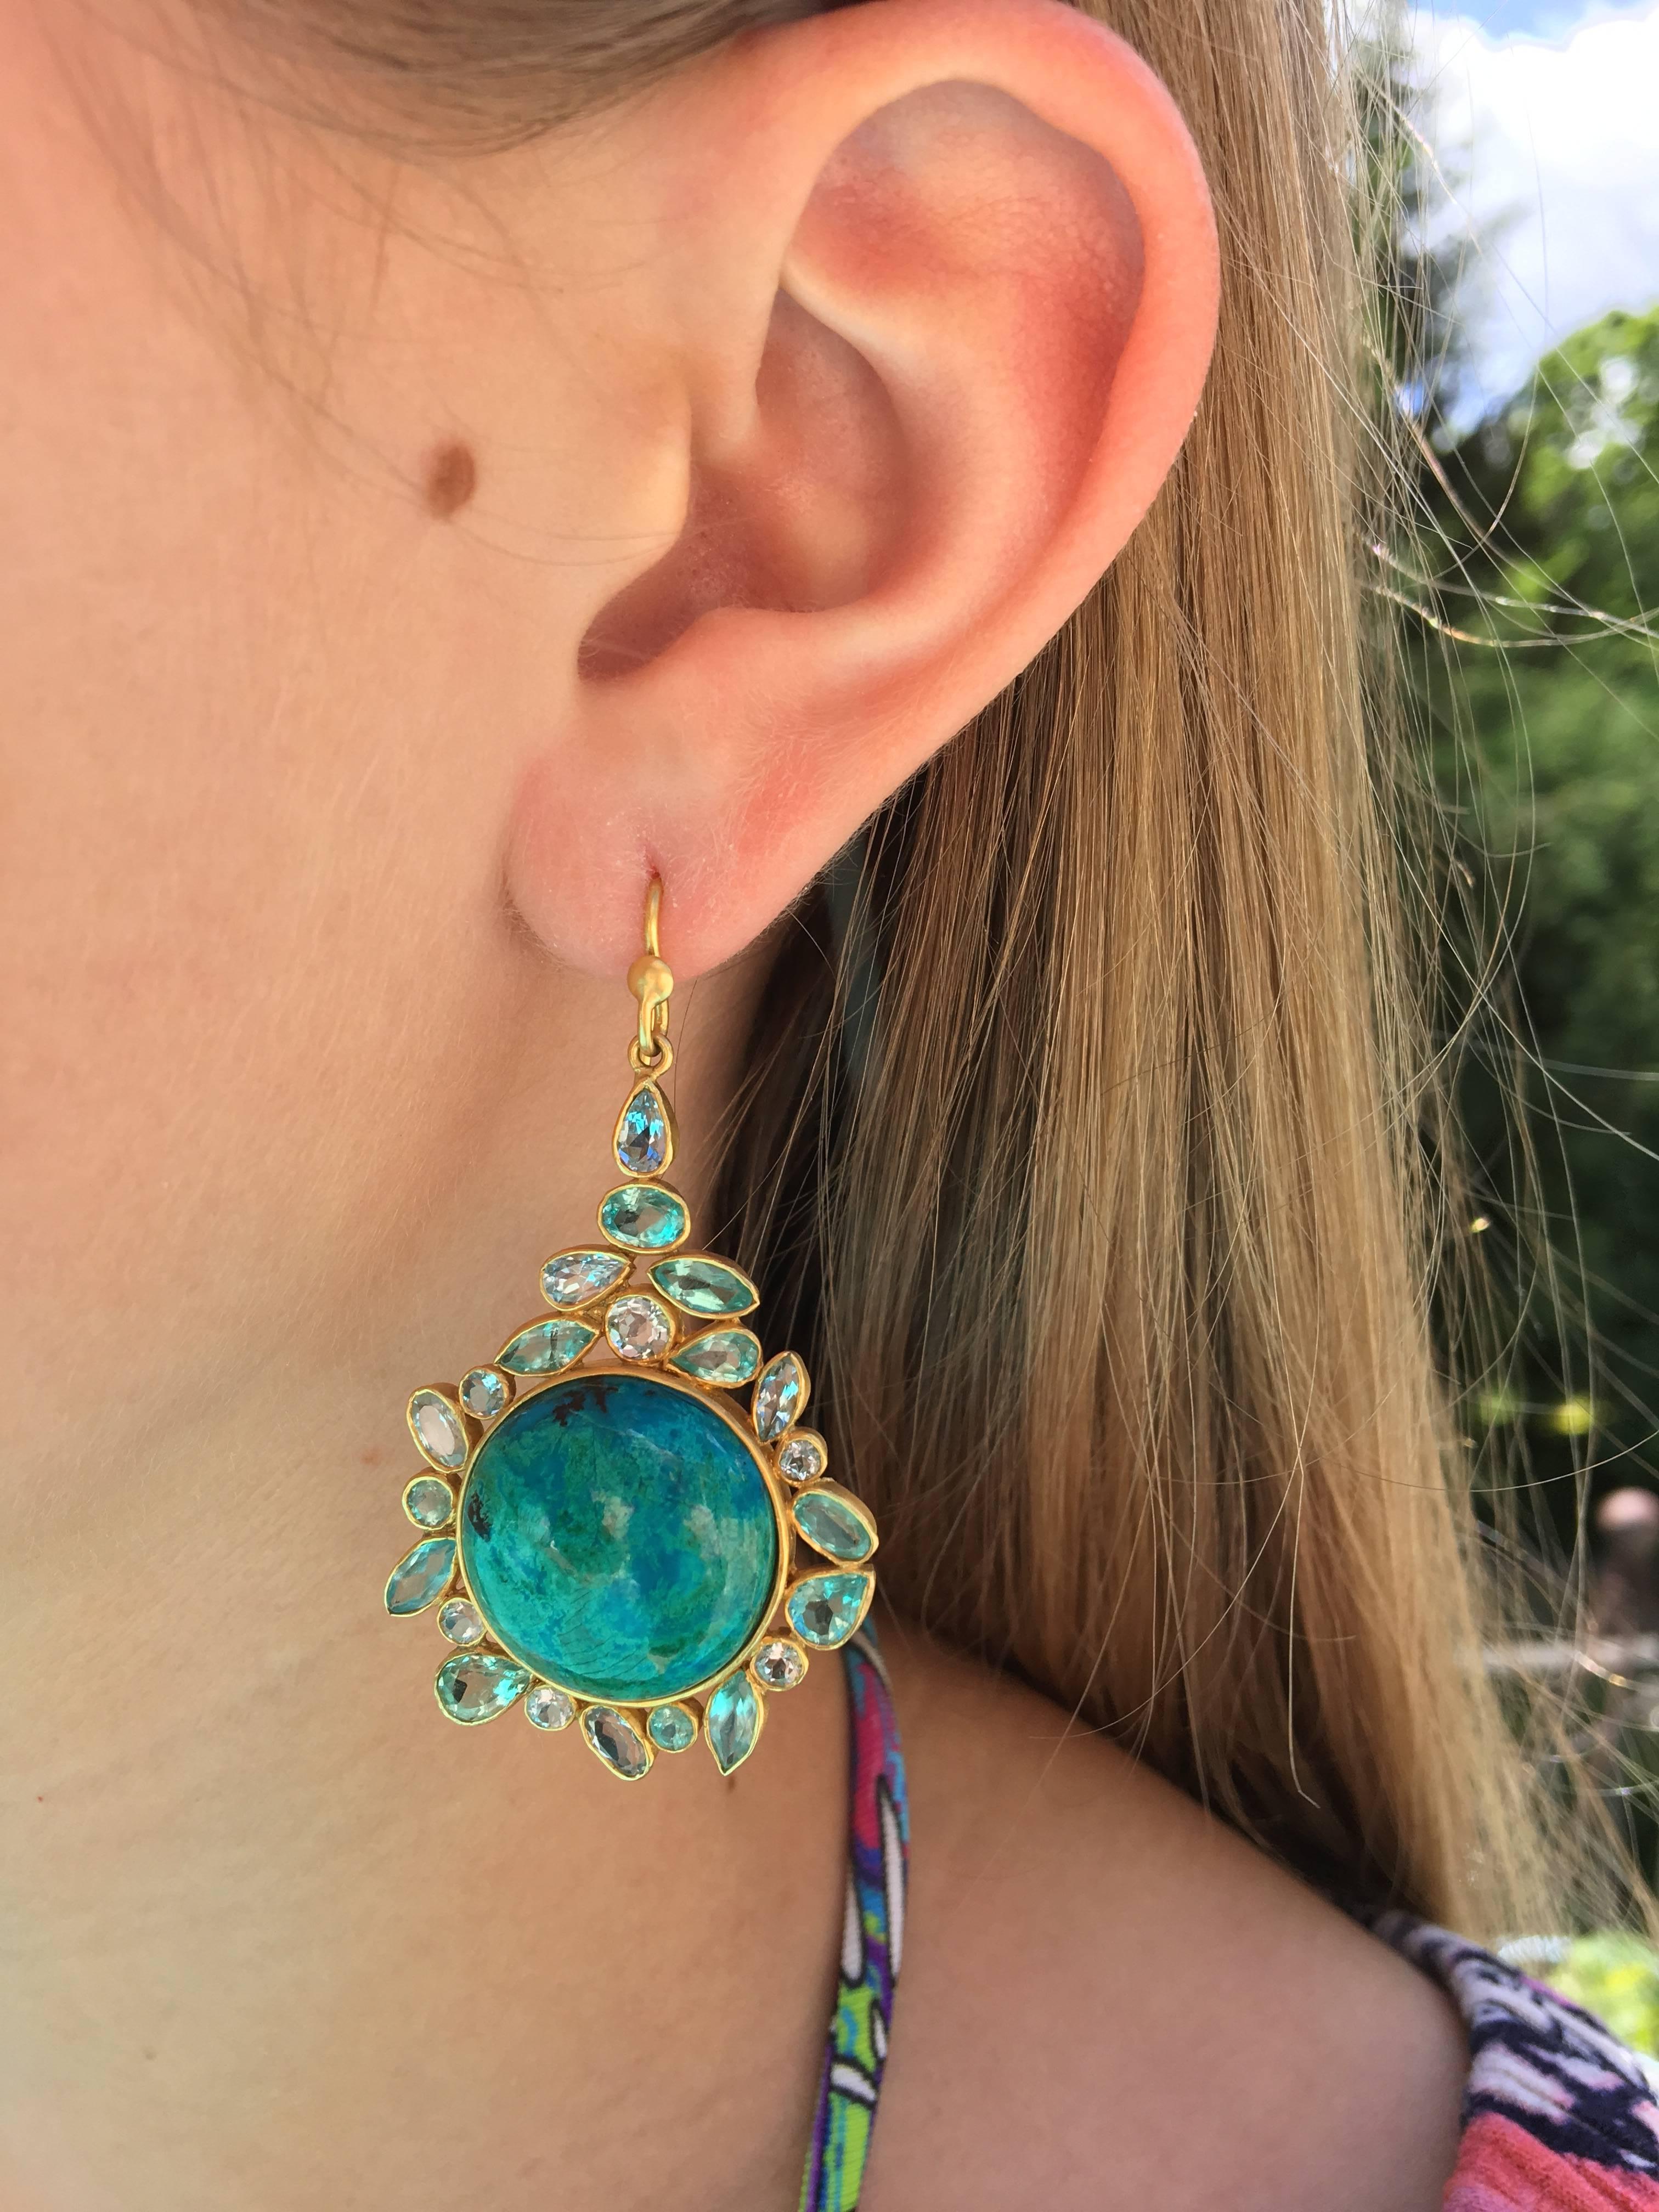 These gorgeous earrings are organic in style, and also offer plenty of color and sparkle.  With a colorful, round cabachon of greenish blue Chrysocolla as a centerpiece, they are surrounded by faceted blues and greens in Aquamarine and Apatite, set